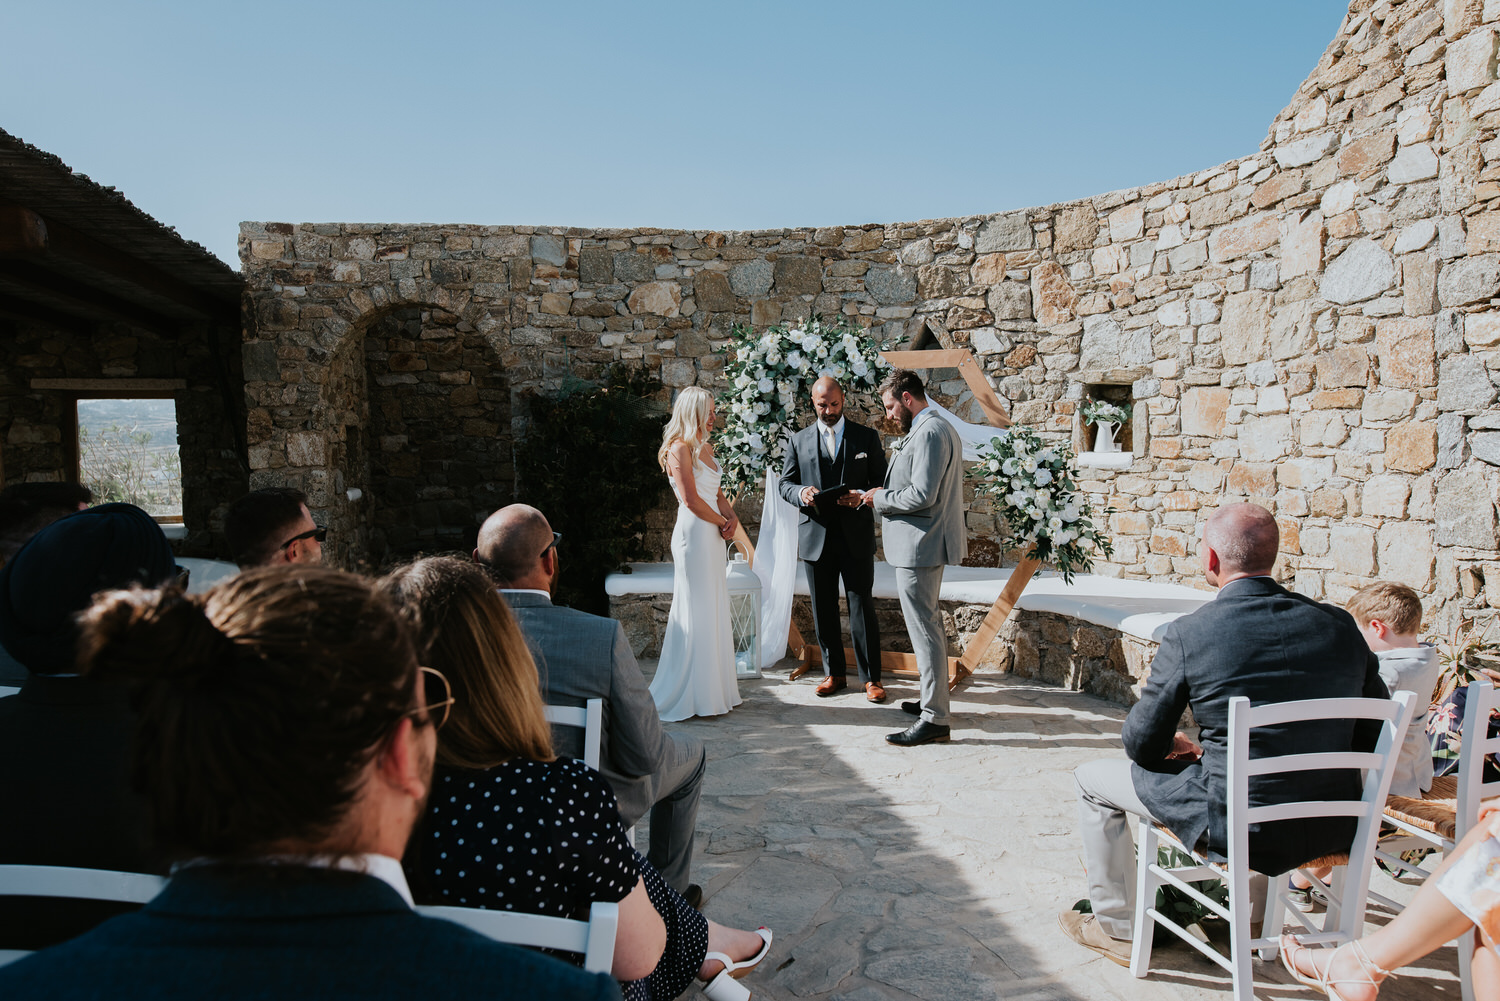 Mykonos wedding photographer: panoramic photo of bride and groom in front of the floral arch and the celebrant with guests sat in the foreground.